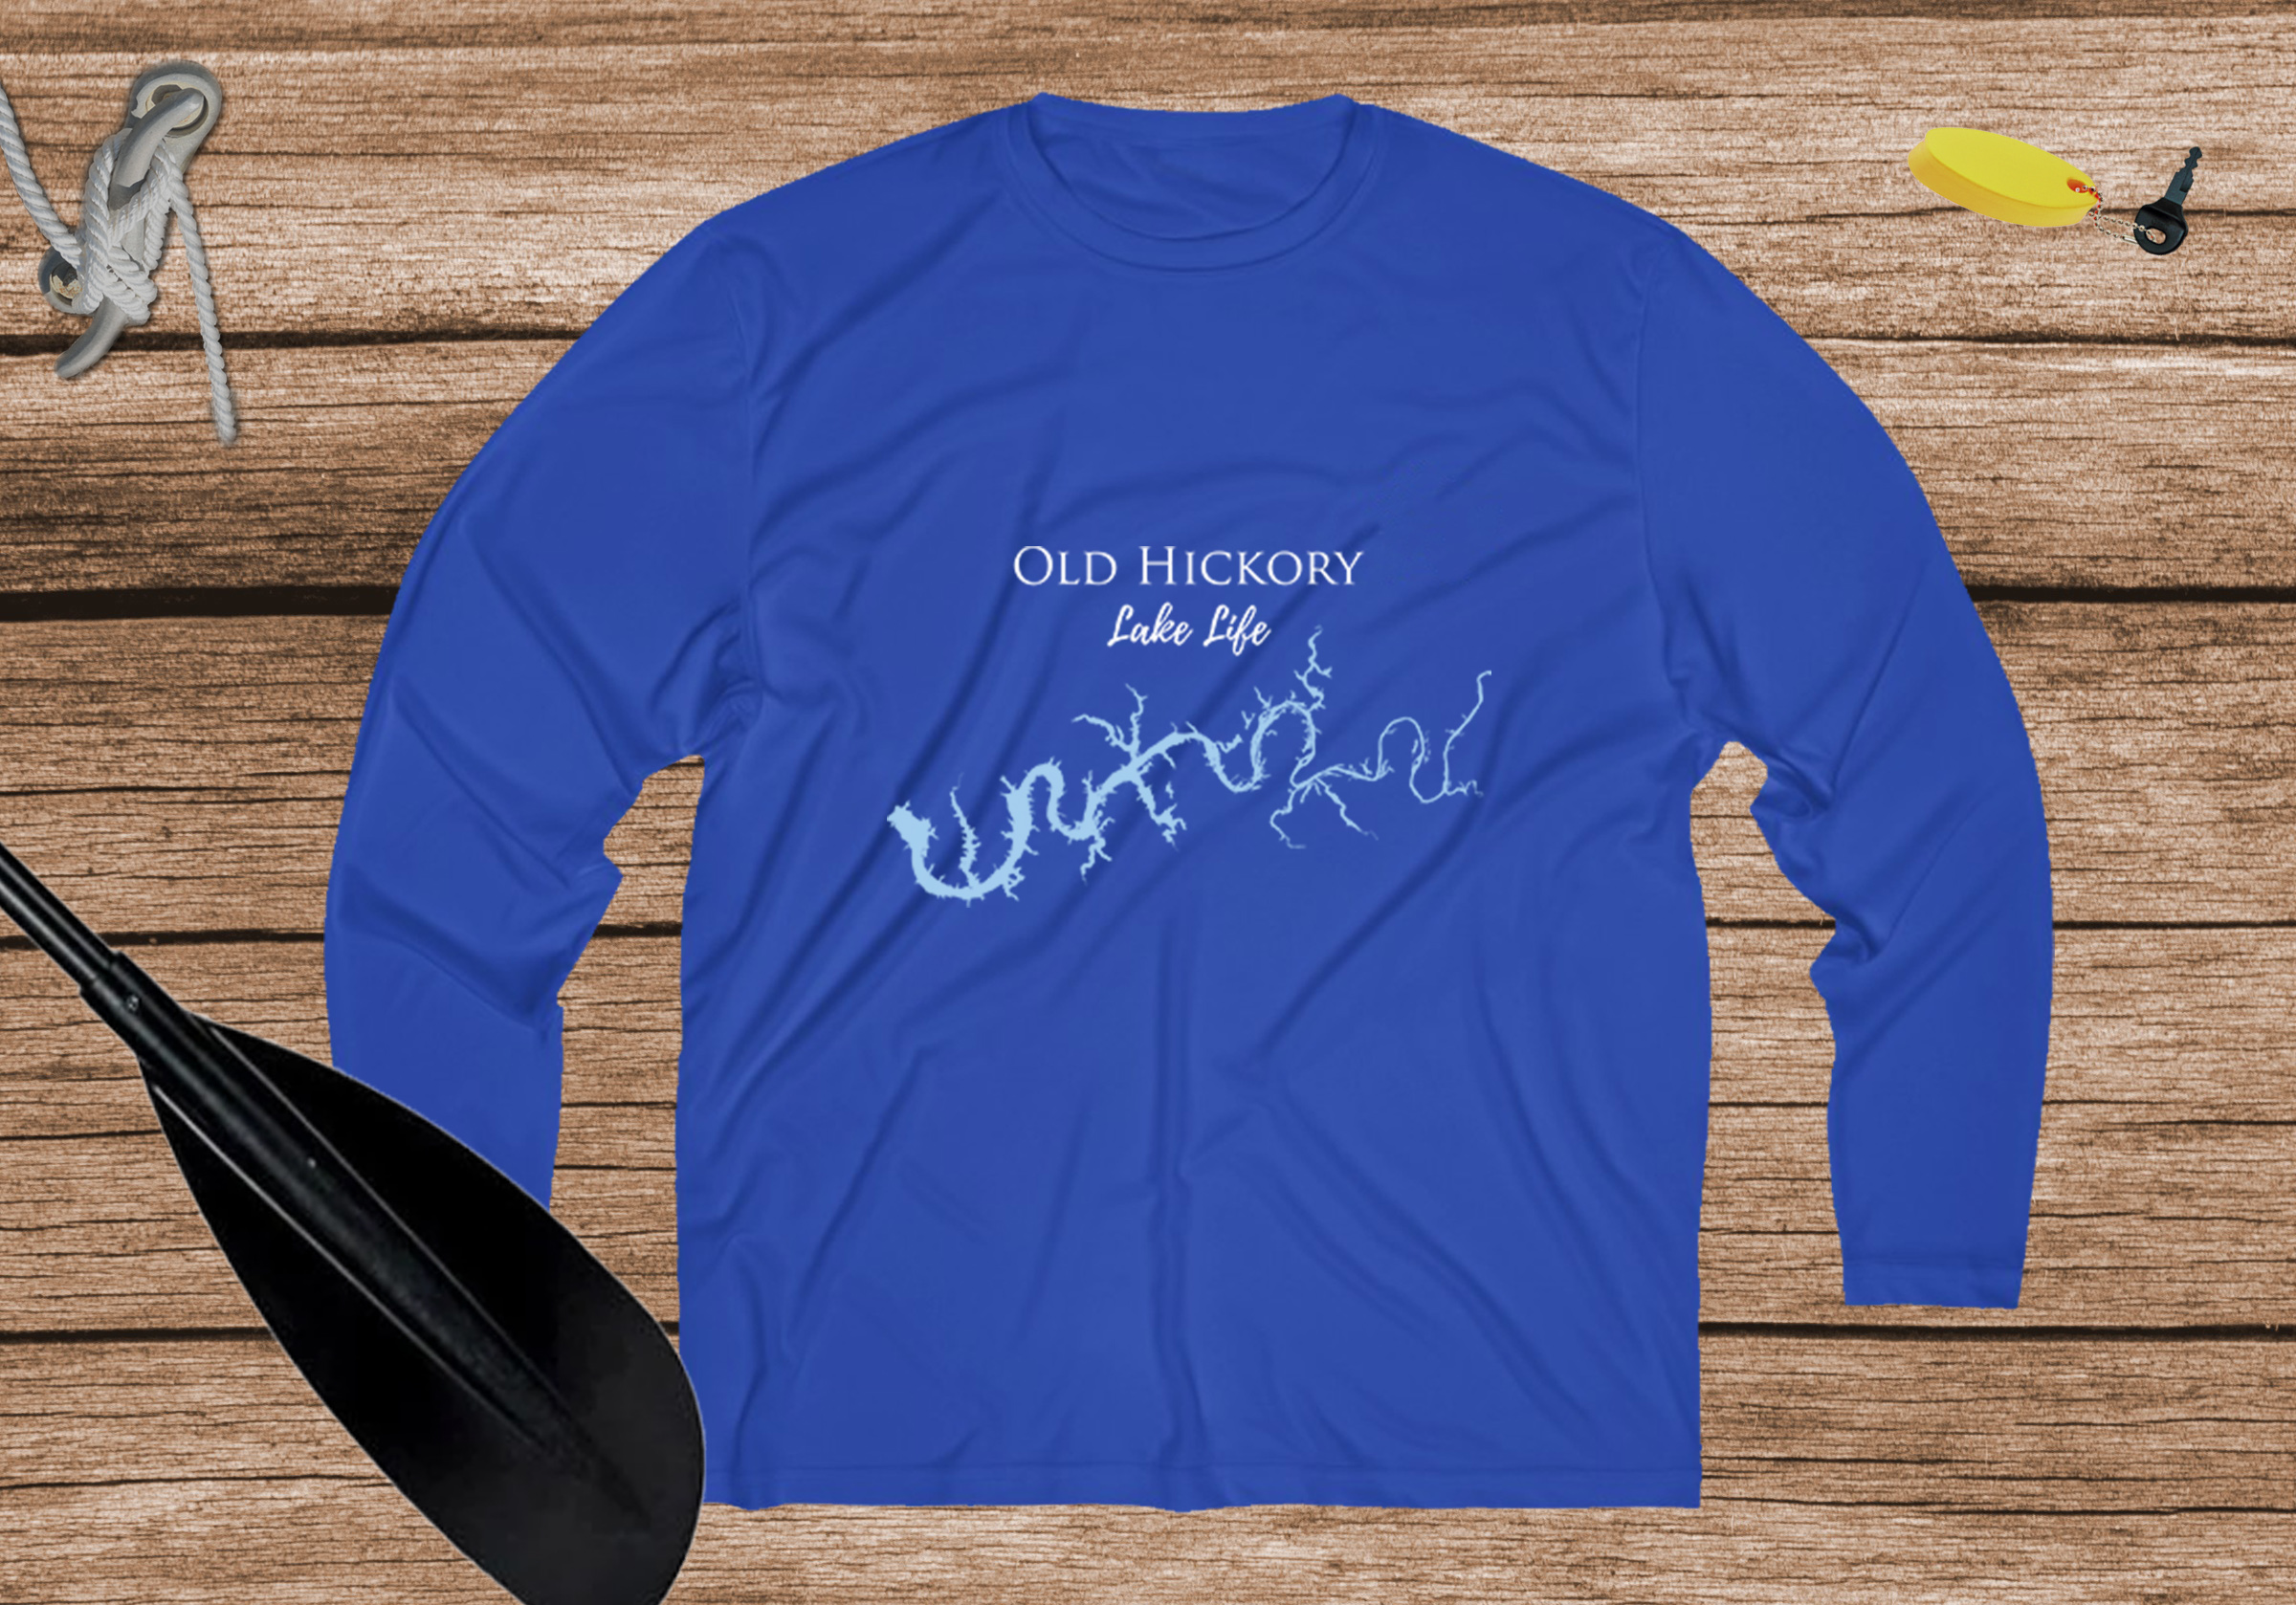 Old Hickory Lake Life Dri-fit Boating Shirt - Breathable Material- Men's Long Sleeve Moisture Wicking Tee - Nashville Tennessee Lake